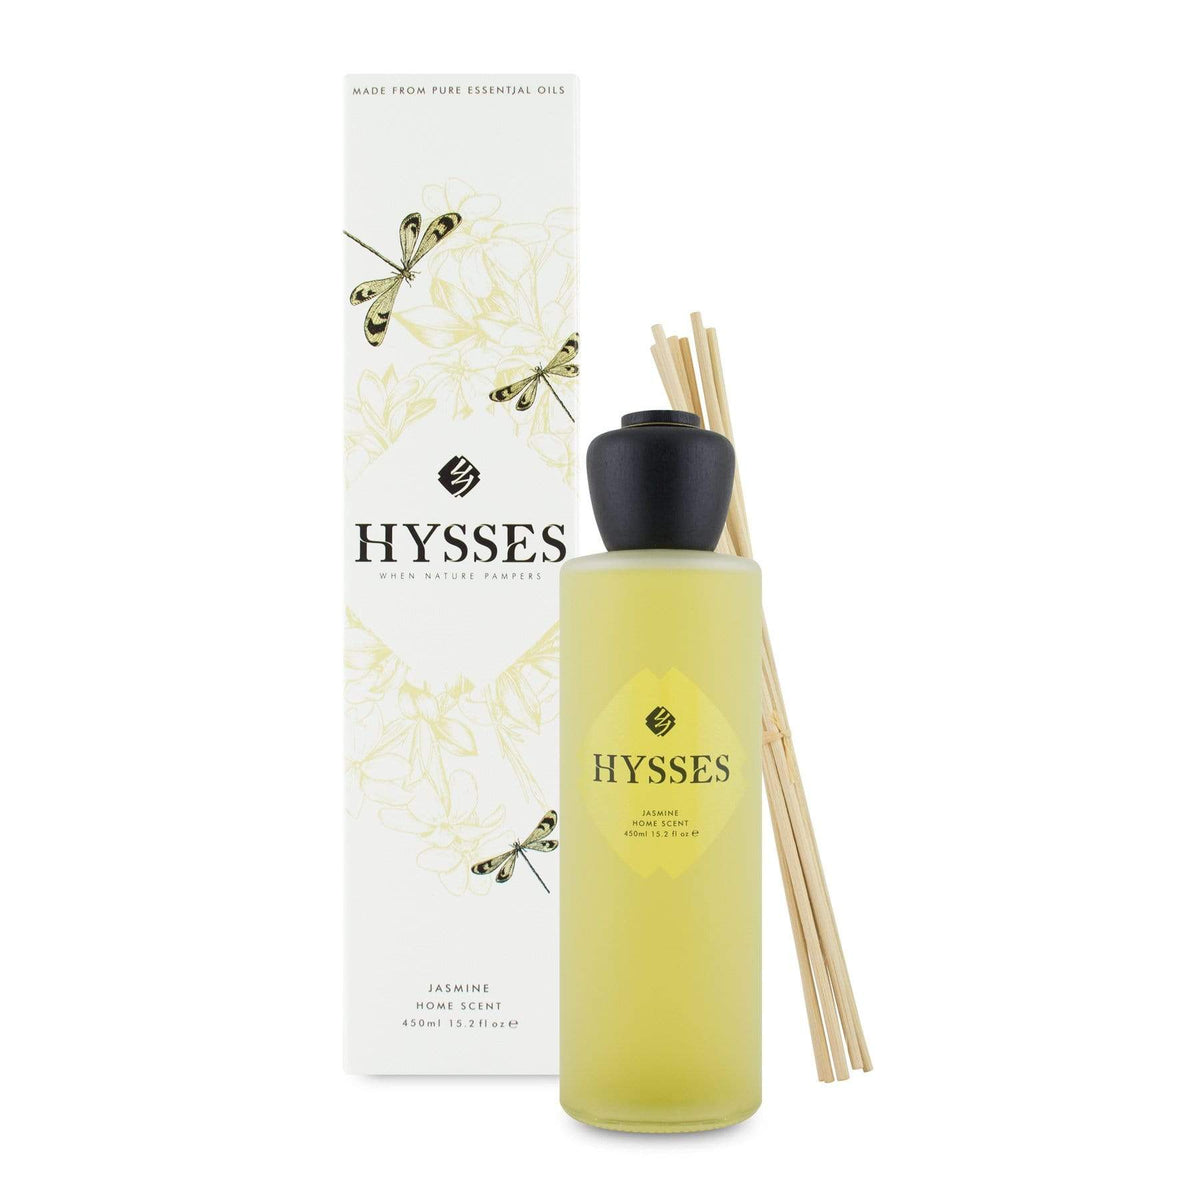 Hysses Home Scents 450ml Home Scent Reed Diffuser Jasmine